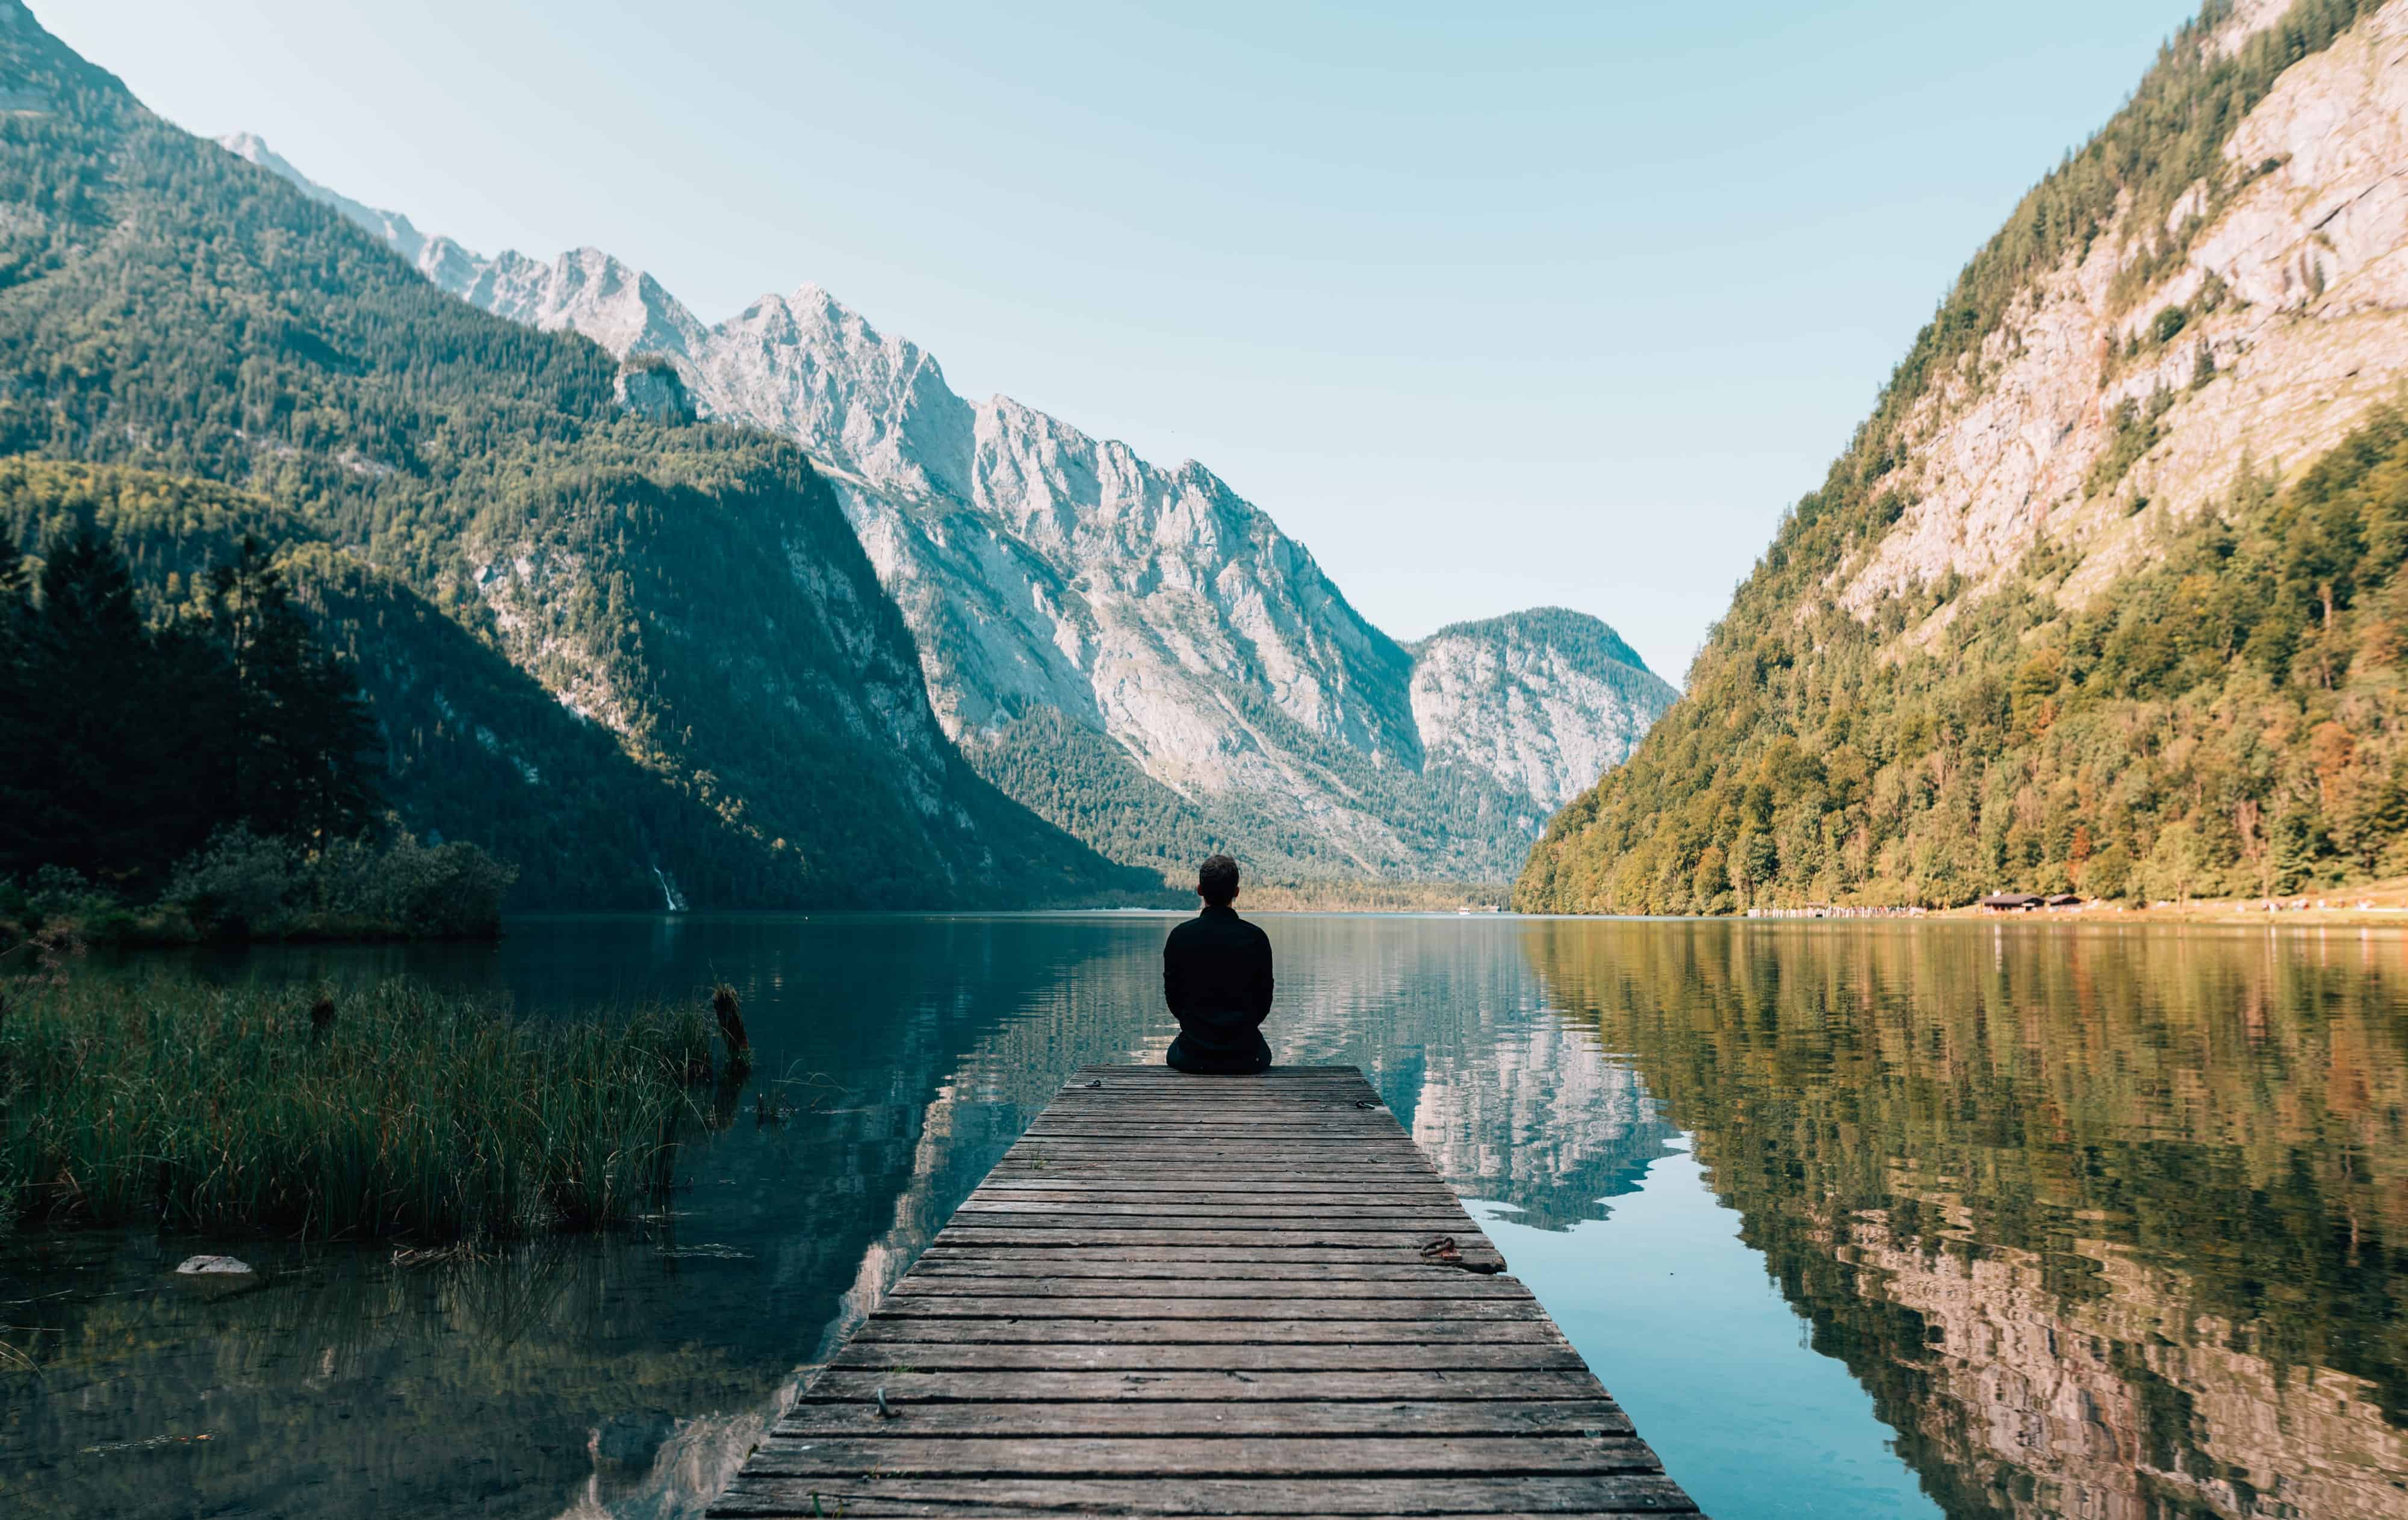 Learn These 3 Important Benefits of Meditation and Mindfulness That Will Change Your Life